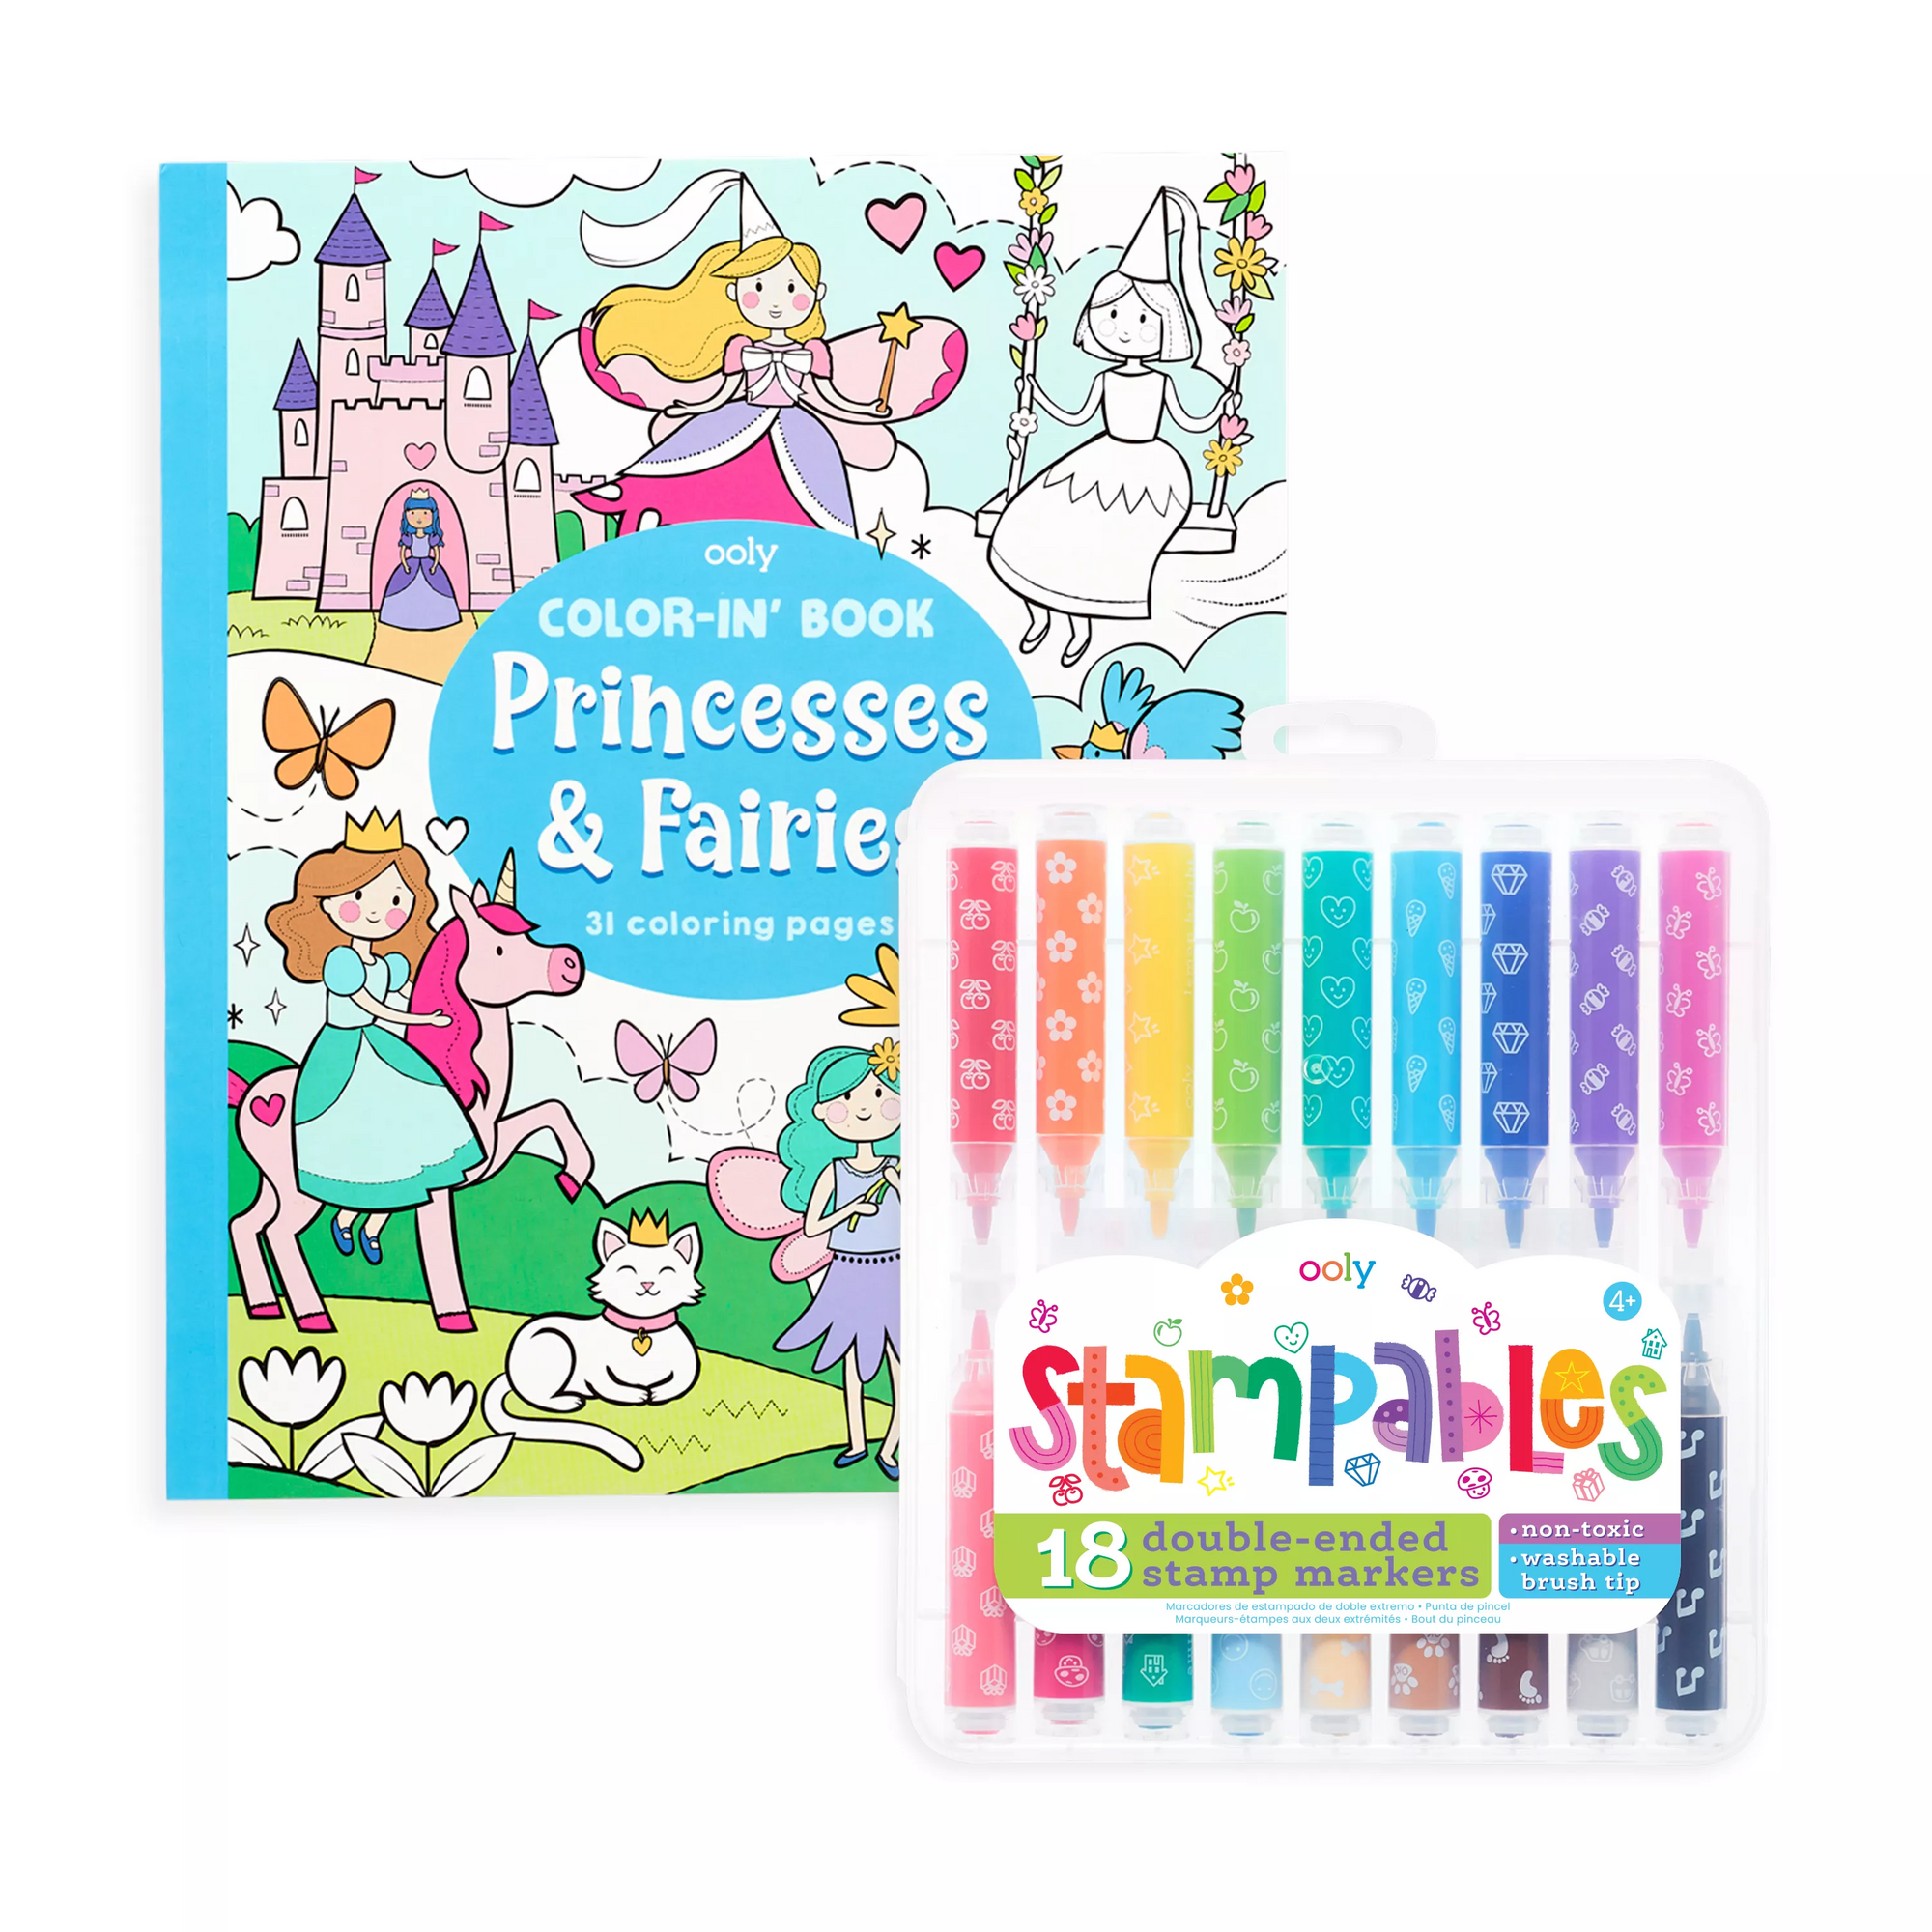 OOLY Princess & Fairies Stampable Coloring Giftables Pack out of gift wrap